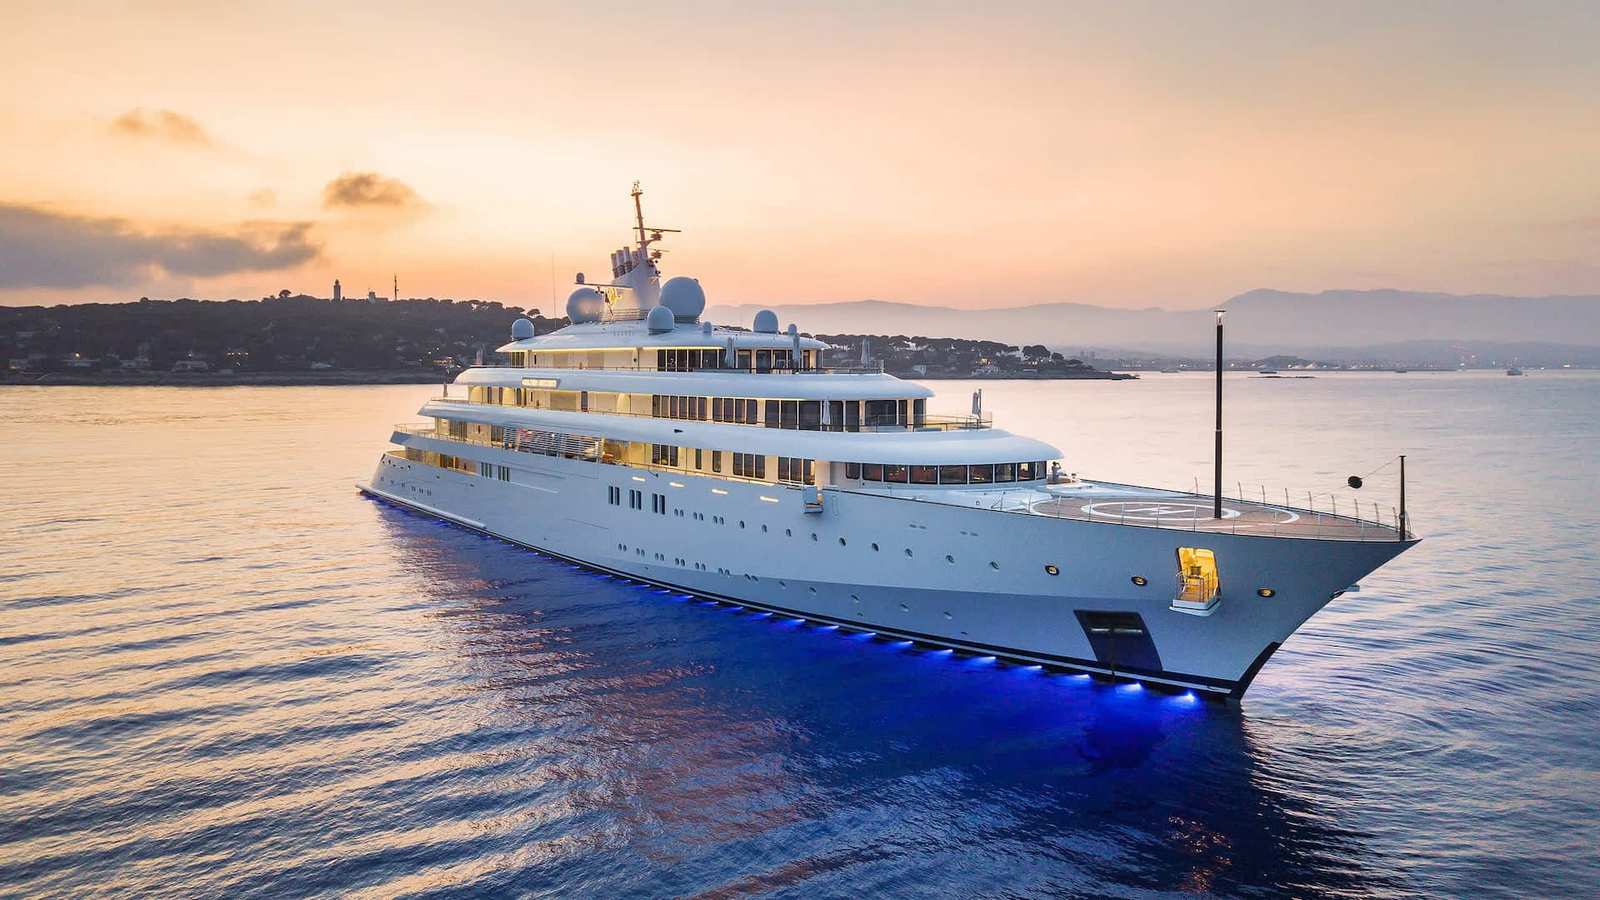 Failing to repay his loan, a Saudi Prince's $400 million superyacht has been seized and auctioned in Malta for just $150 million. The floating palace is the world’s 36th-largest yacht, and its sale proceeds will go to Deutsche bank.